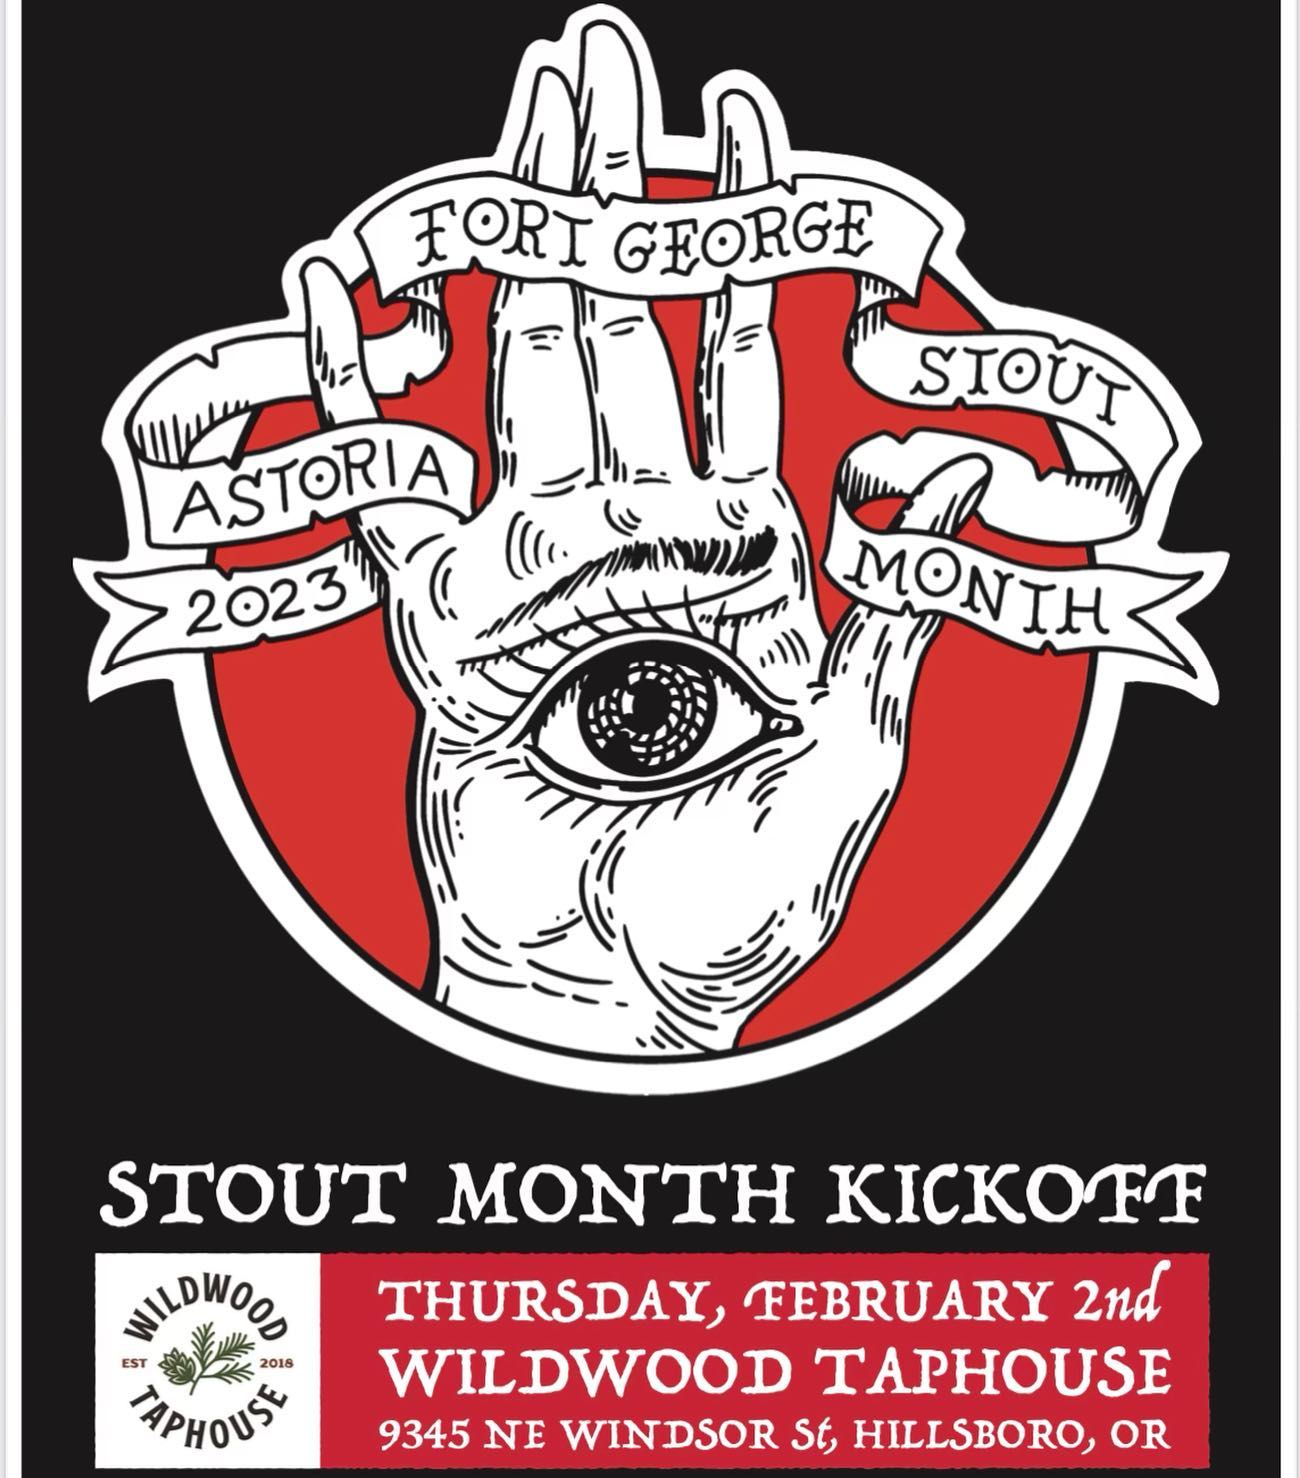 Tomorrow we are welcoming Fort George for the kick off event of Stout Month! Make sure to come out and indulge yourself in some wonderful new releases and rarities! Buckle up, this is going to be incredible. 
Kegs Tapped - 11am
Party - 5pm
.
@fortgeorgebeer @brewworden 
.
.
.
.
.
#wildwoodtaphouse #wildwoodtap #fortgeorge #fortgeorgebrewery #stoutmonth #darkbeer #stoutmonth2023 #craftbeer #craftbeerlover #astoriabeer #hillsborobeer #pnwbeer #twoisaparty #partyon